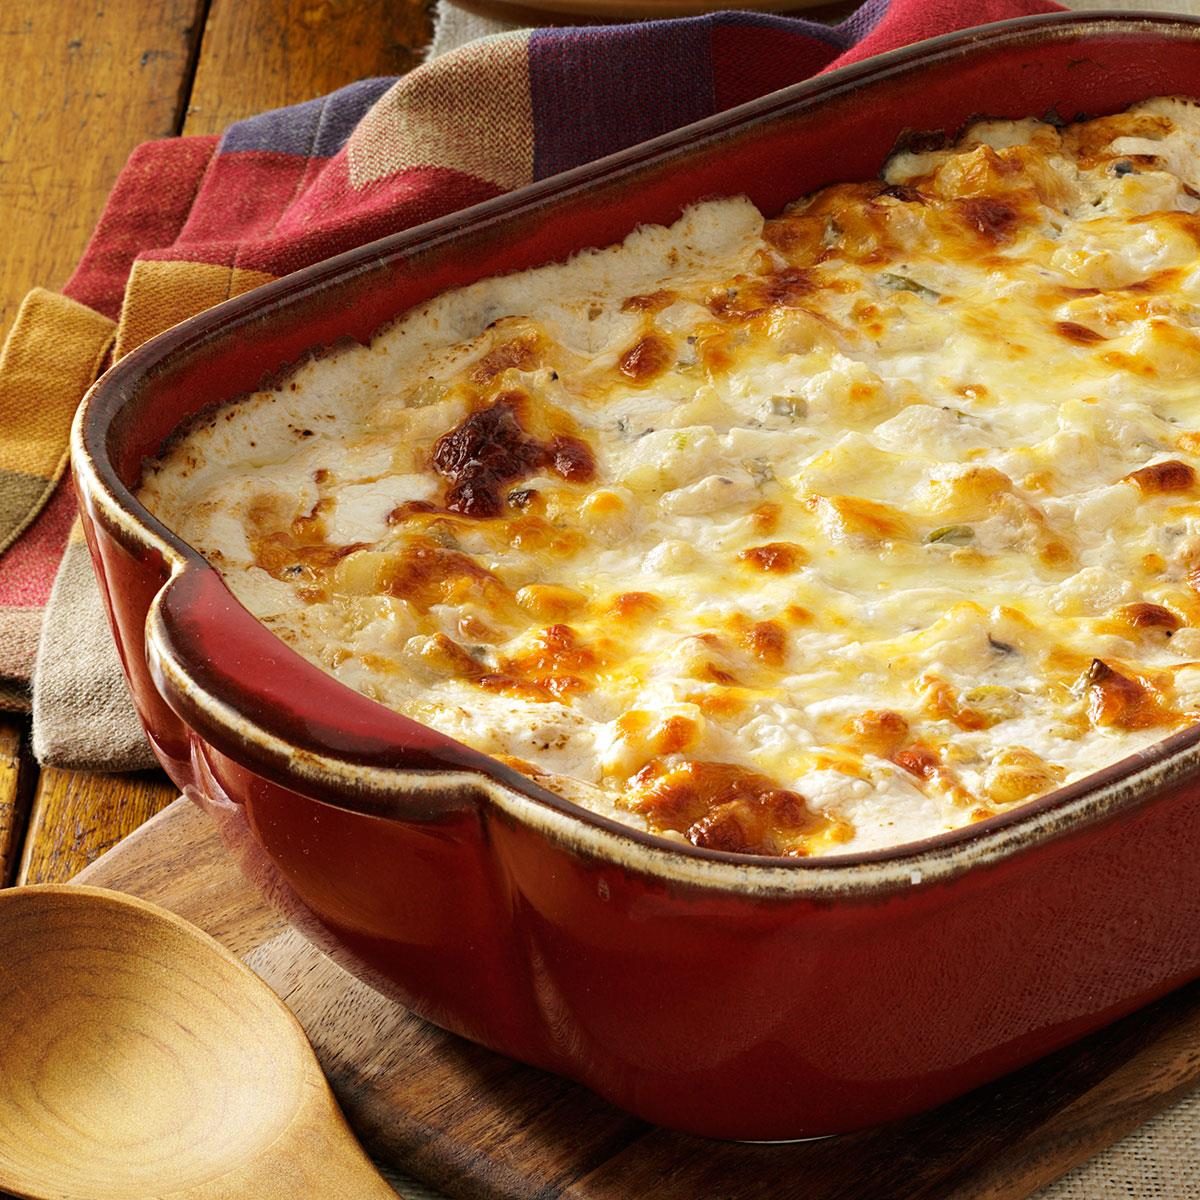 Comforting Potato Casserole Exps35603 Omrr2777383a06 04 1bc Rms 2